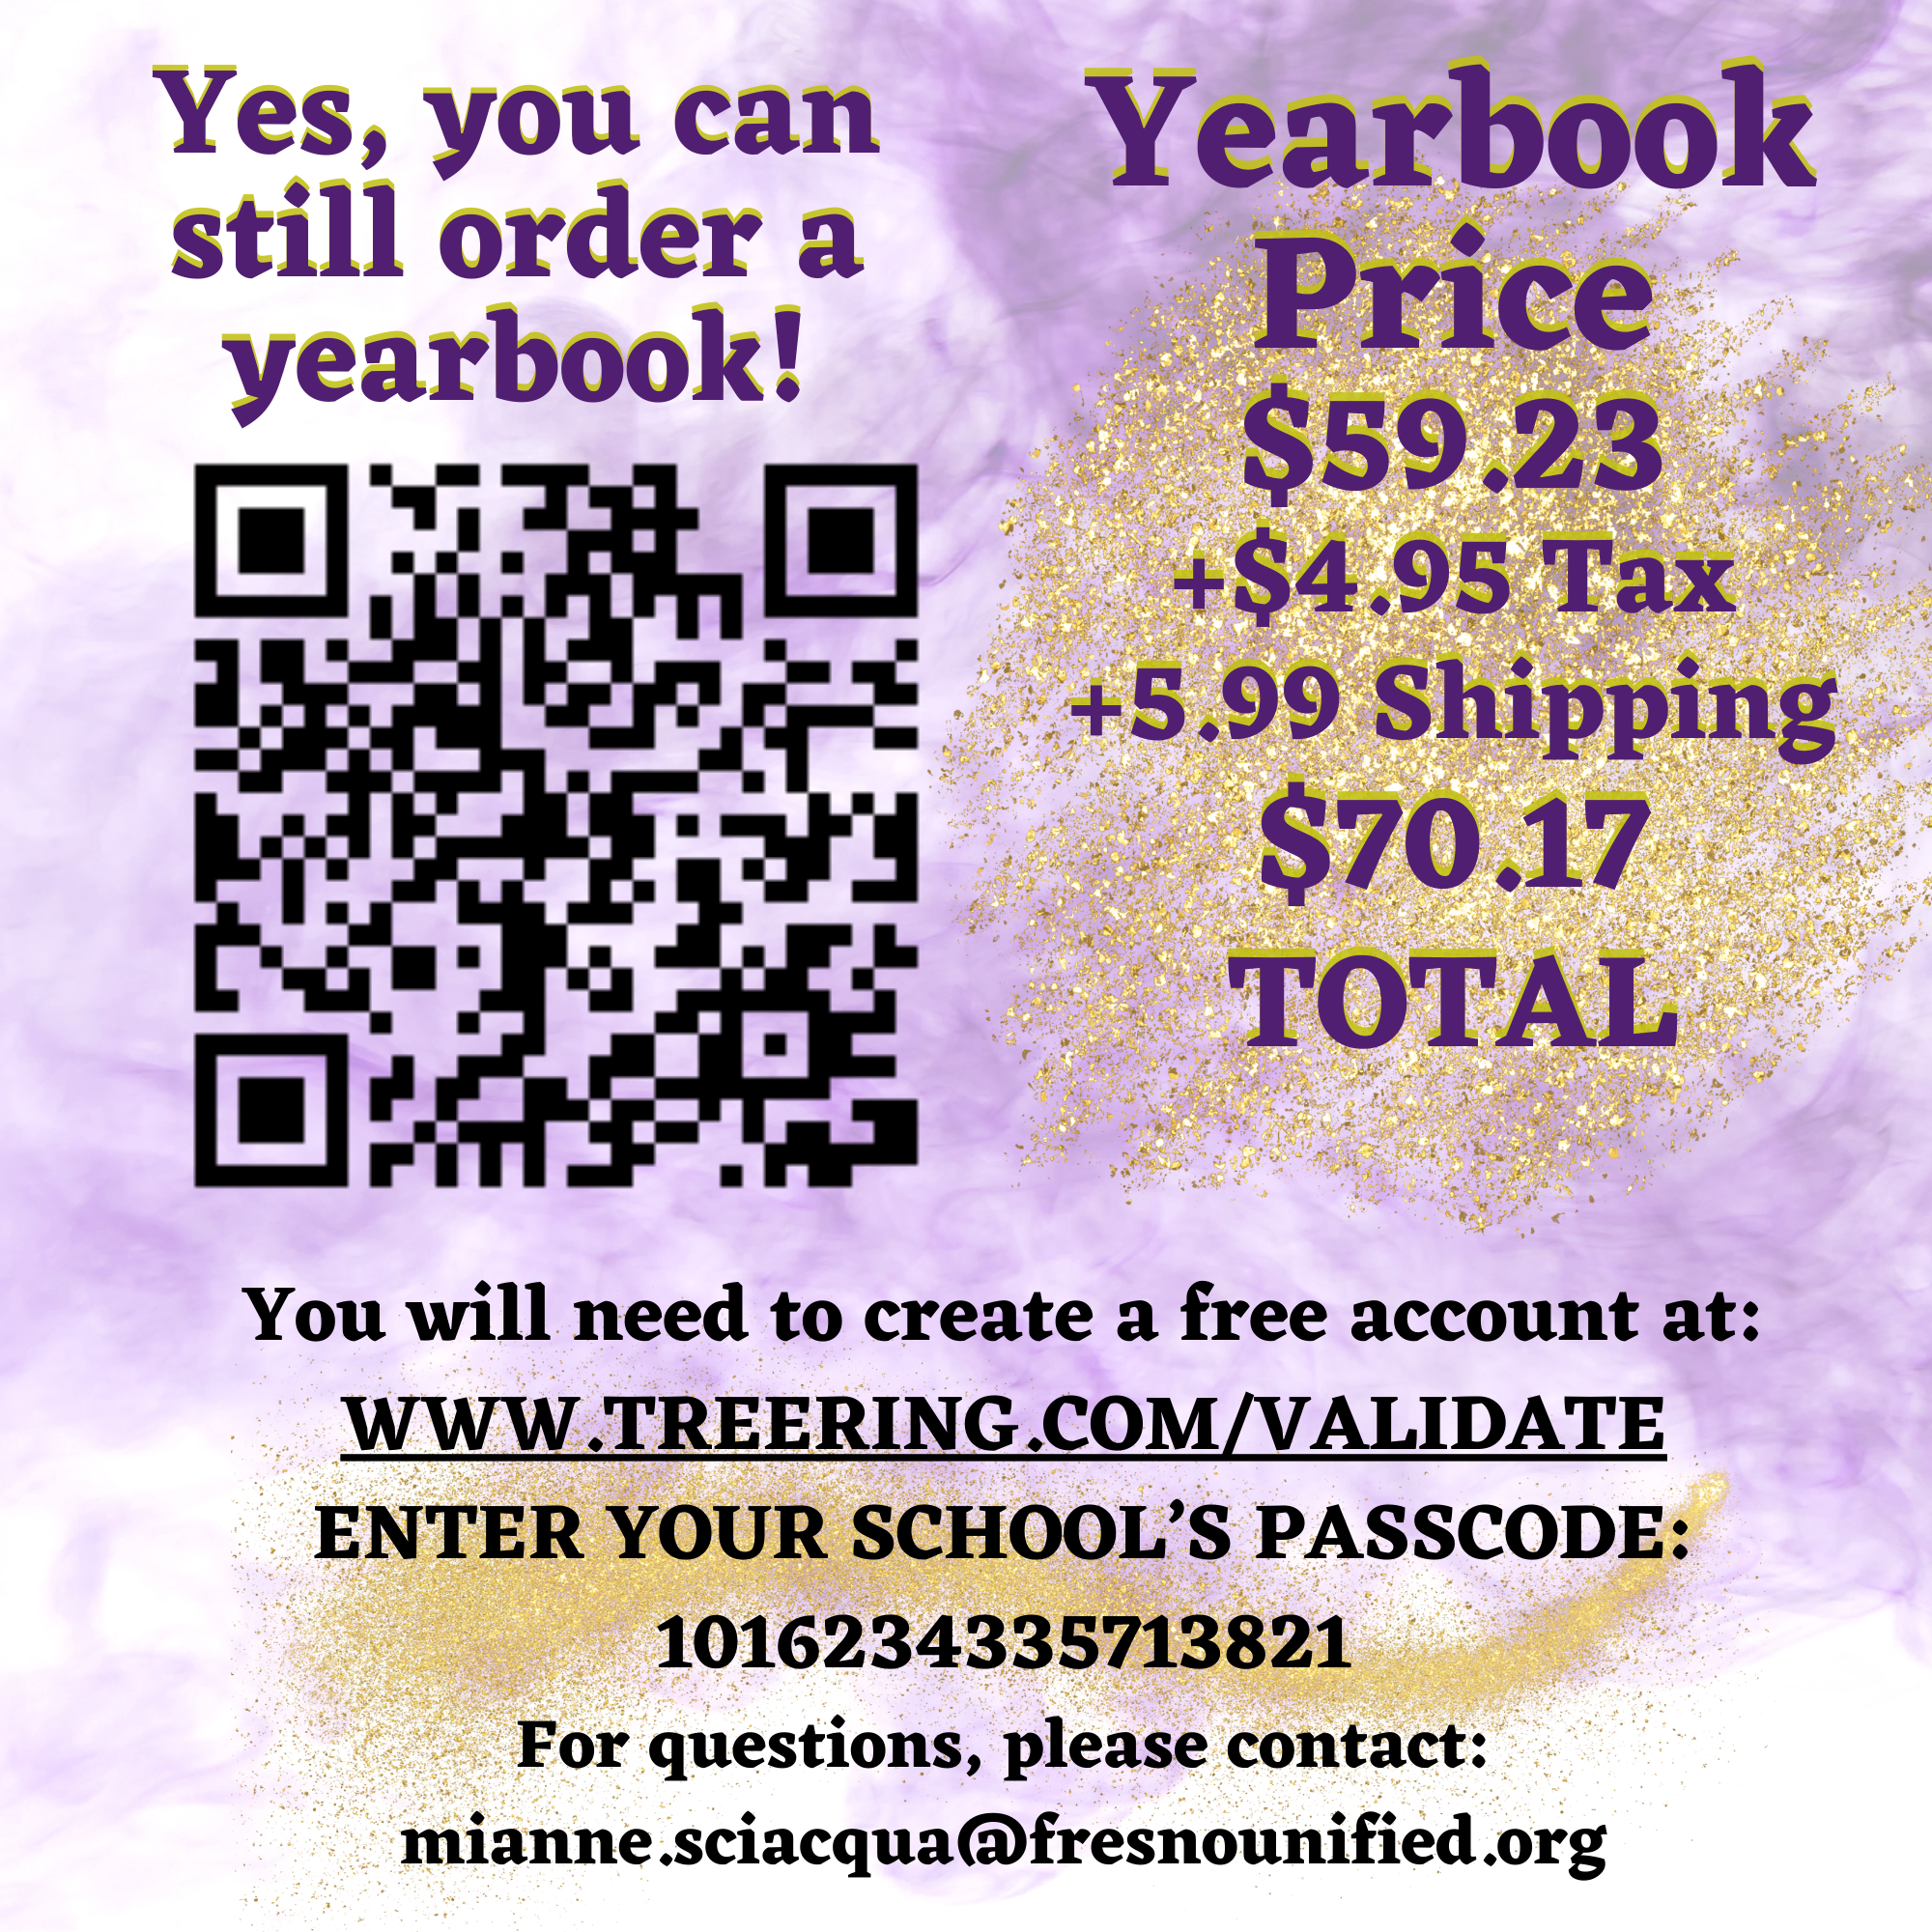 Yearbook Price with Shipping.png